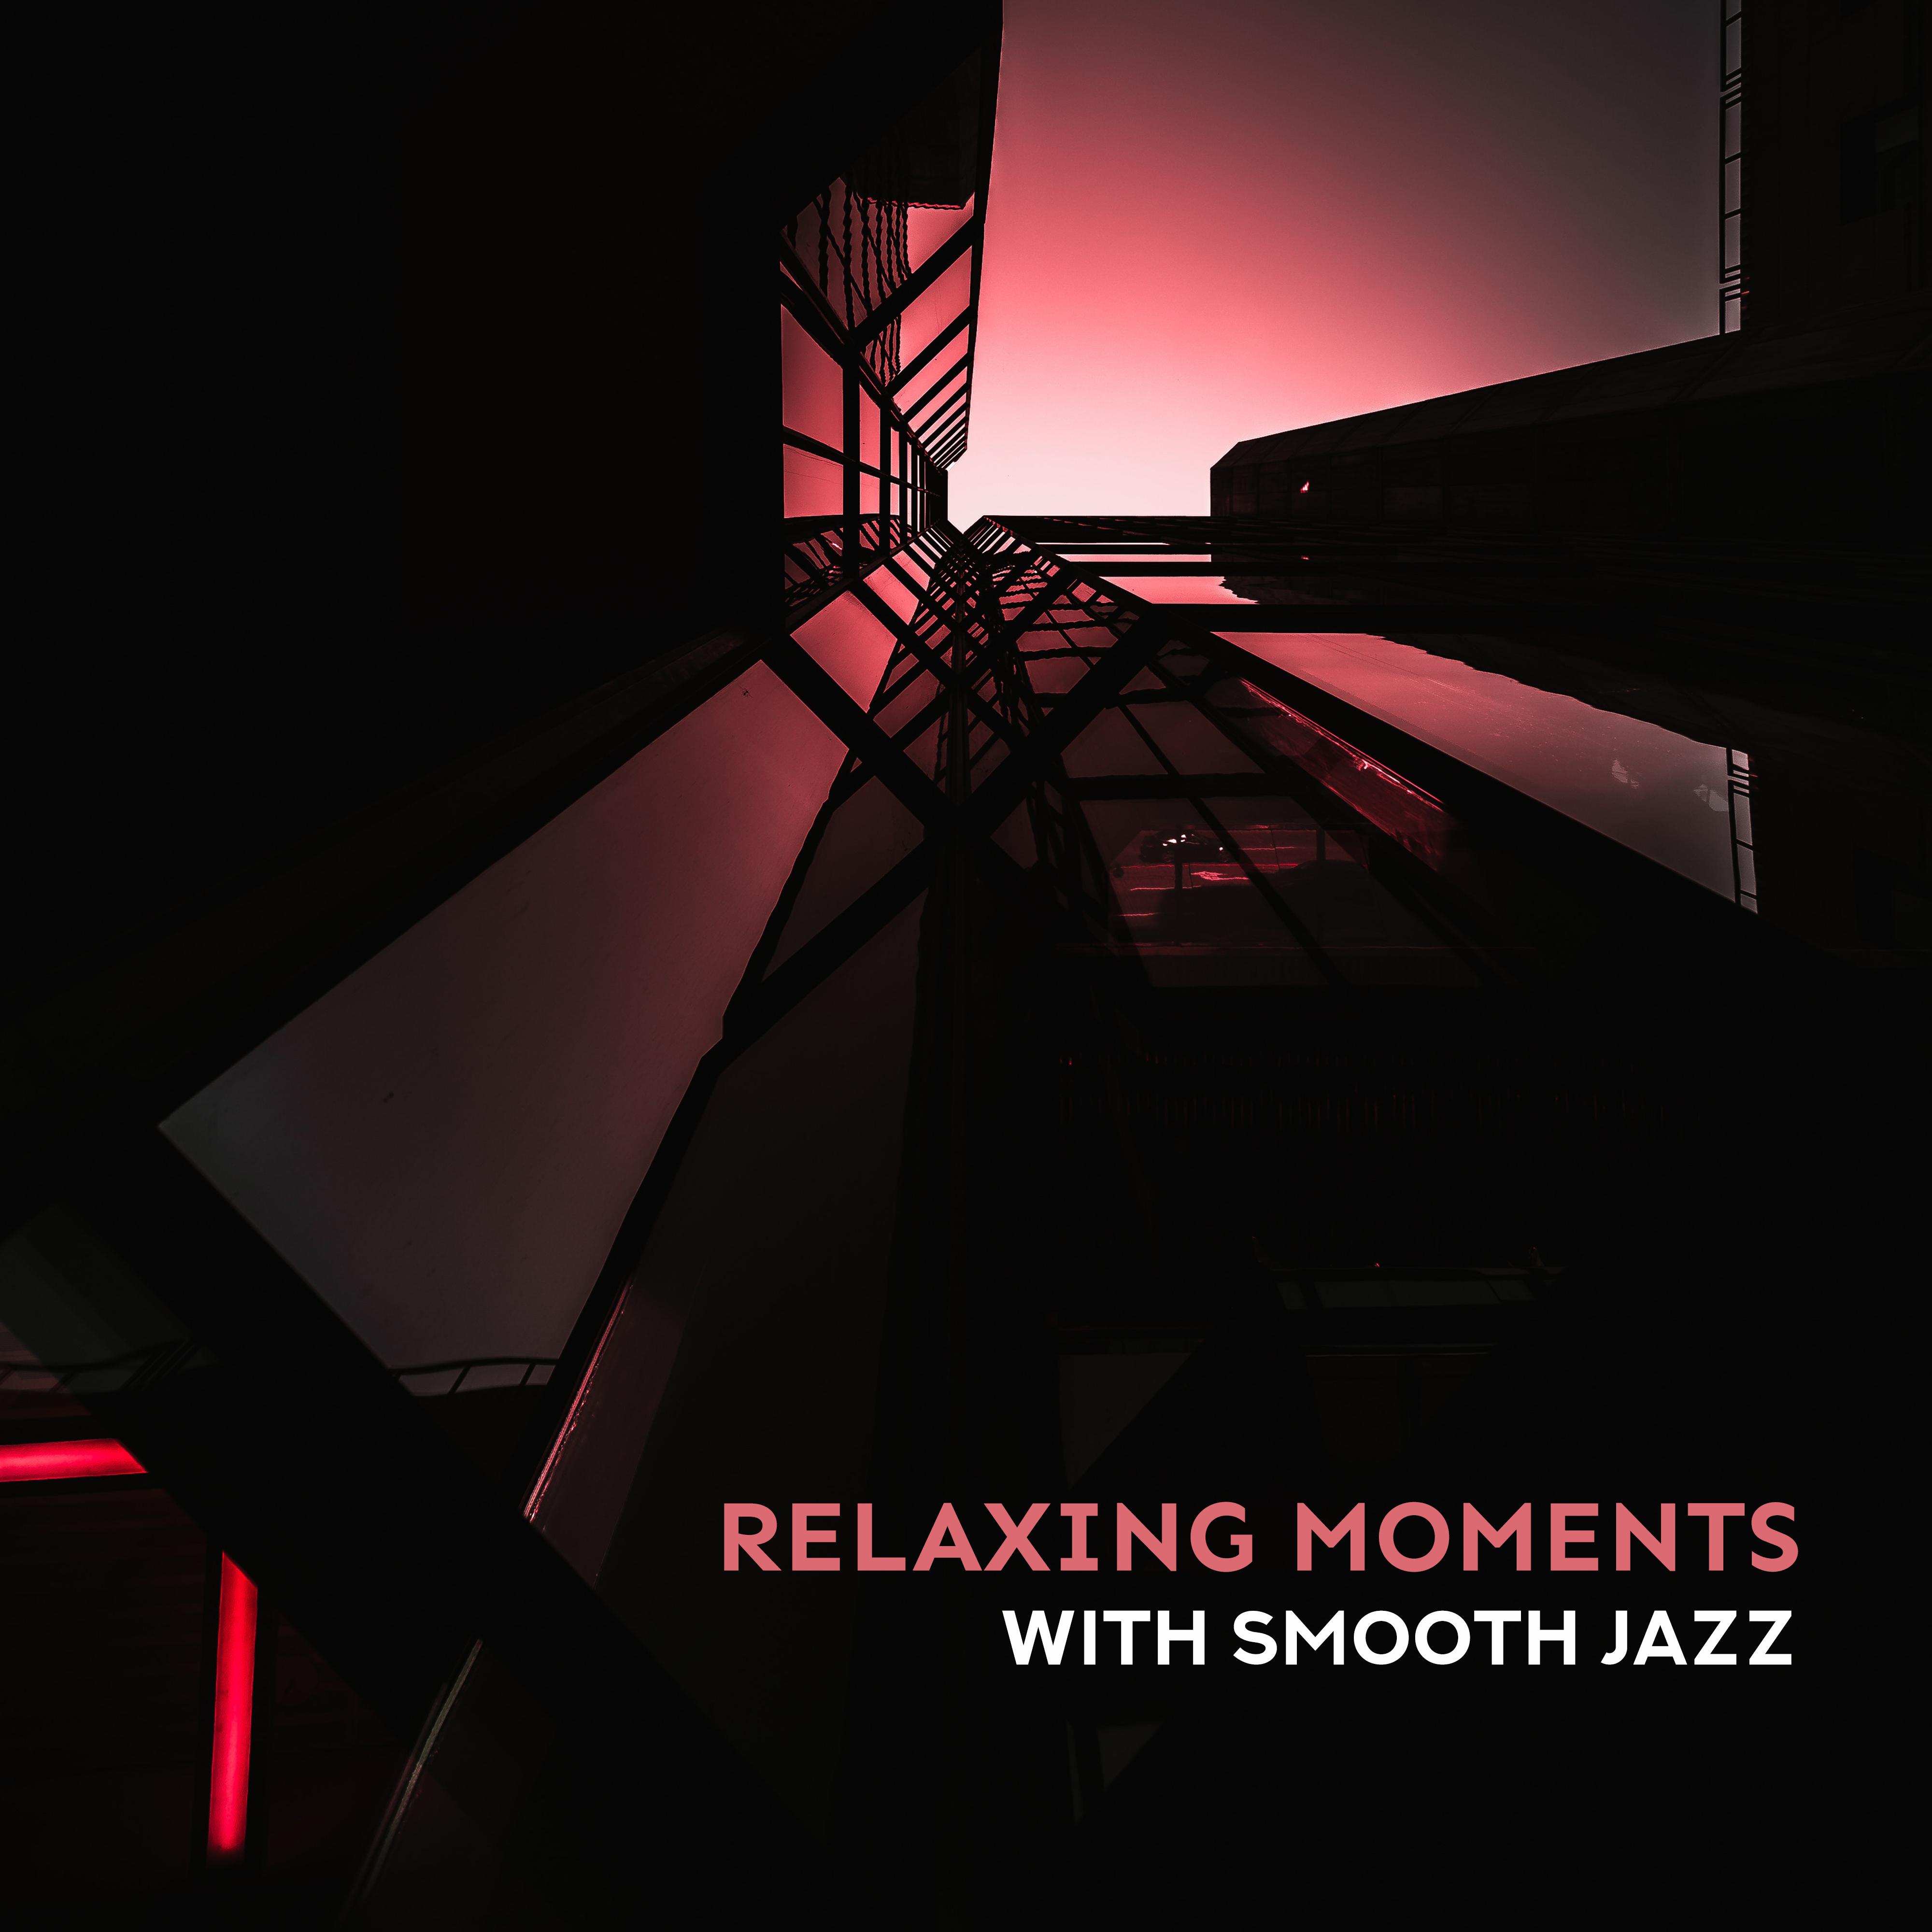 Relaxing Moments with Smooth Jazz